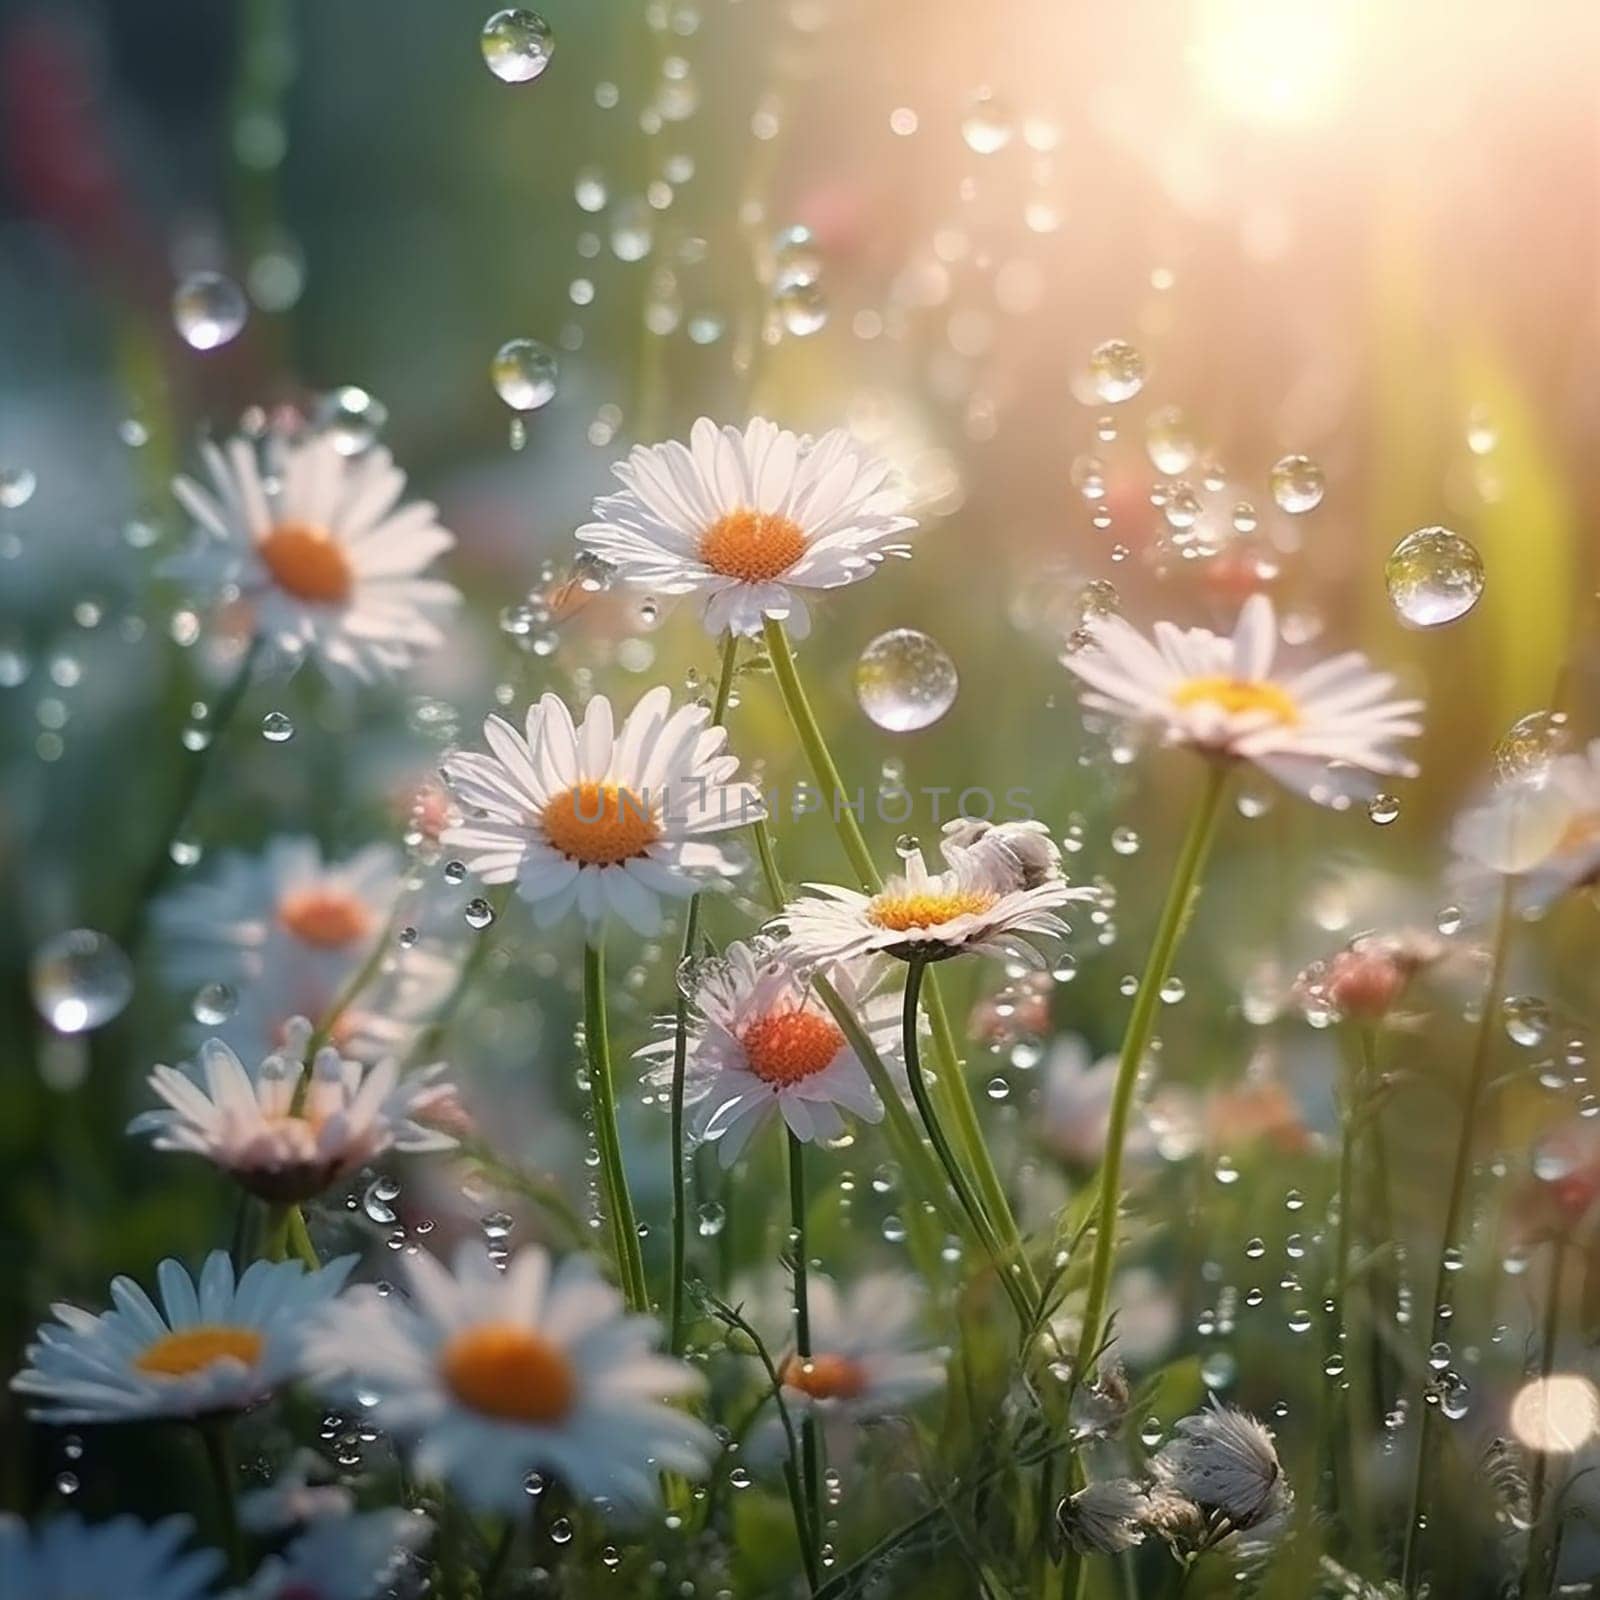 Daisies with dew drops illuminated by warm sunlight in a tranquil field. by Hype2art